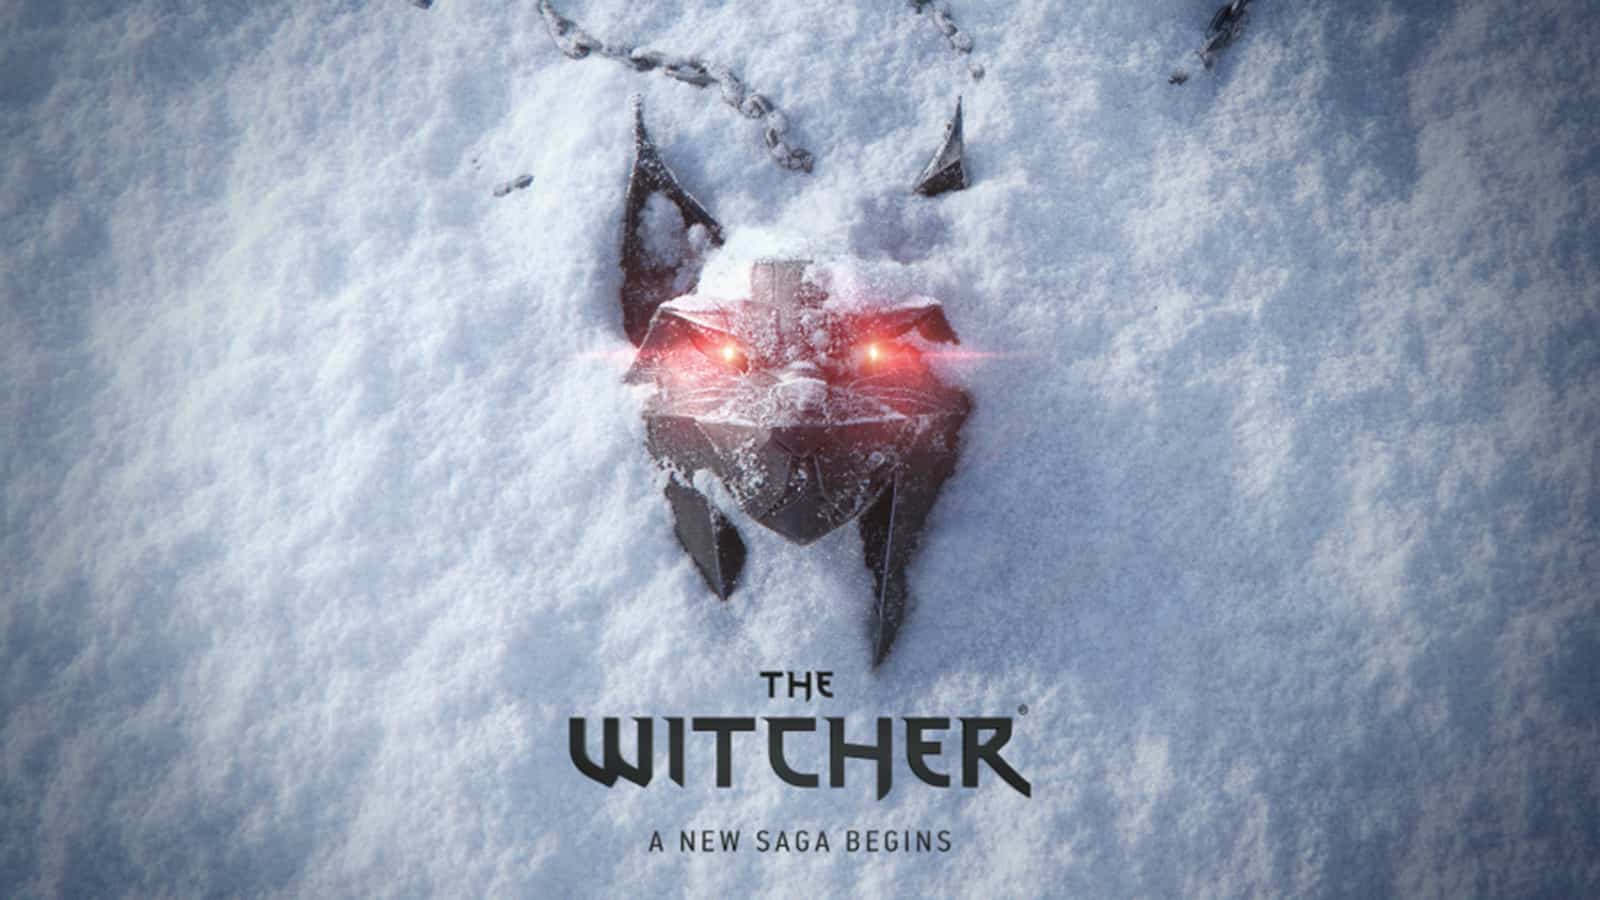 CD Projekt Red Announces New Witcher Game